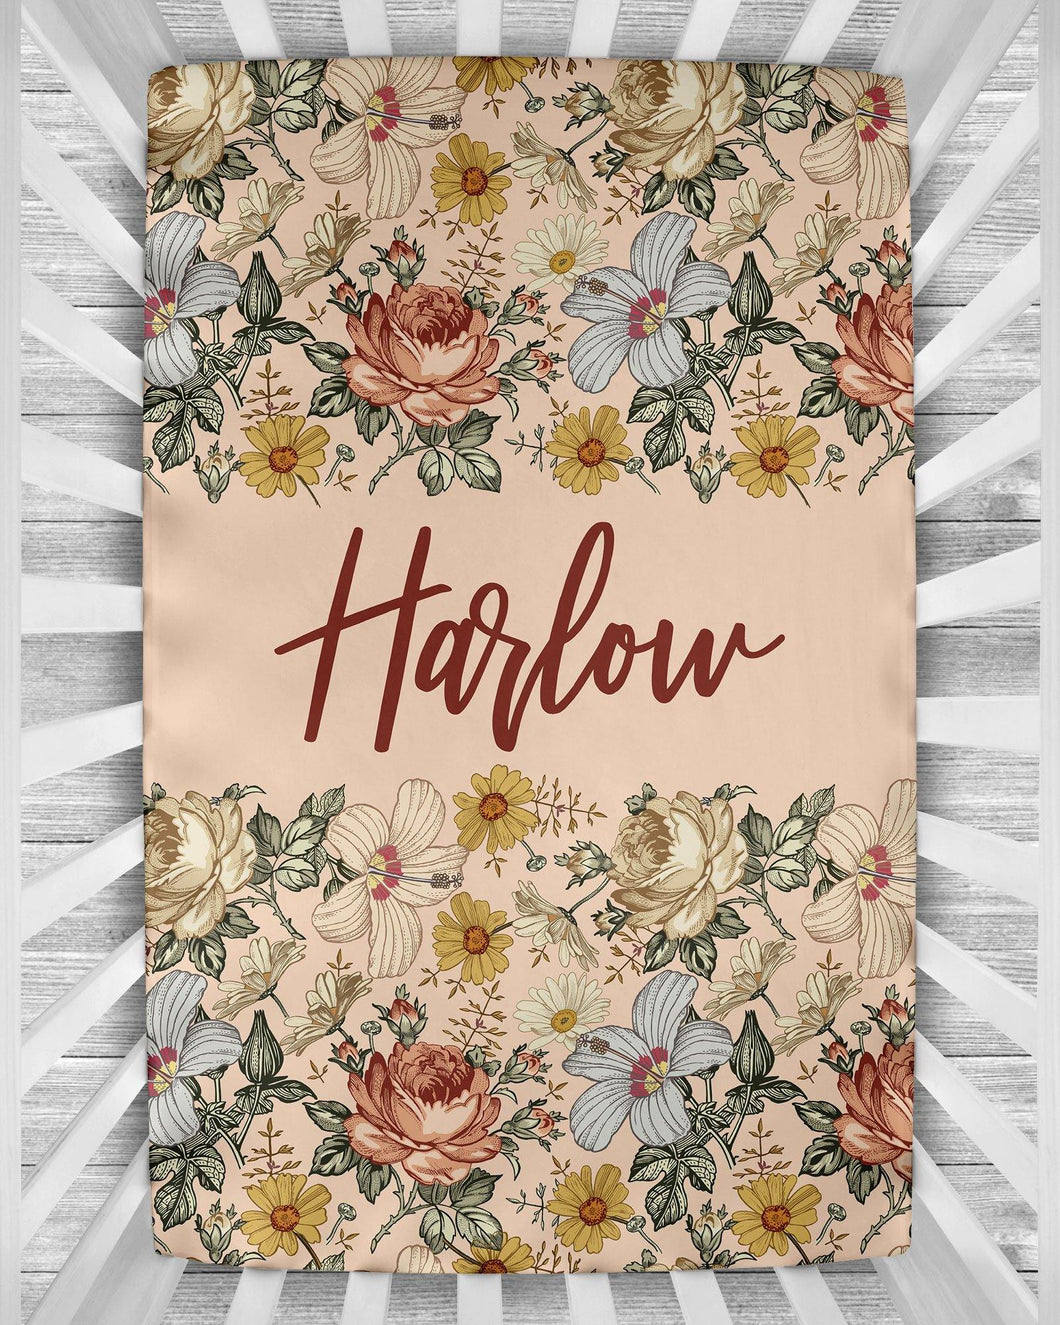 Personalized Crib Sheet - the Harlow collection - rose - The Little Arrows